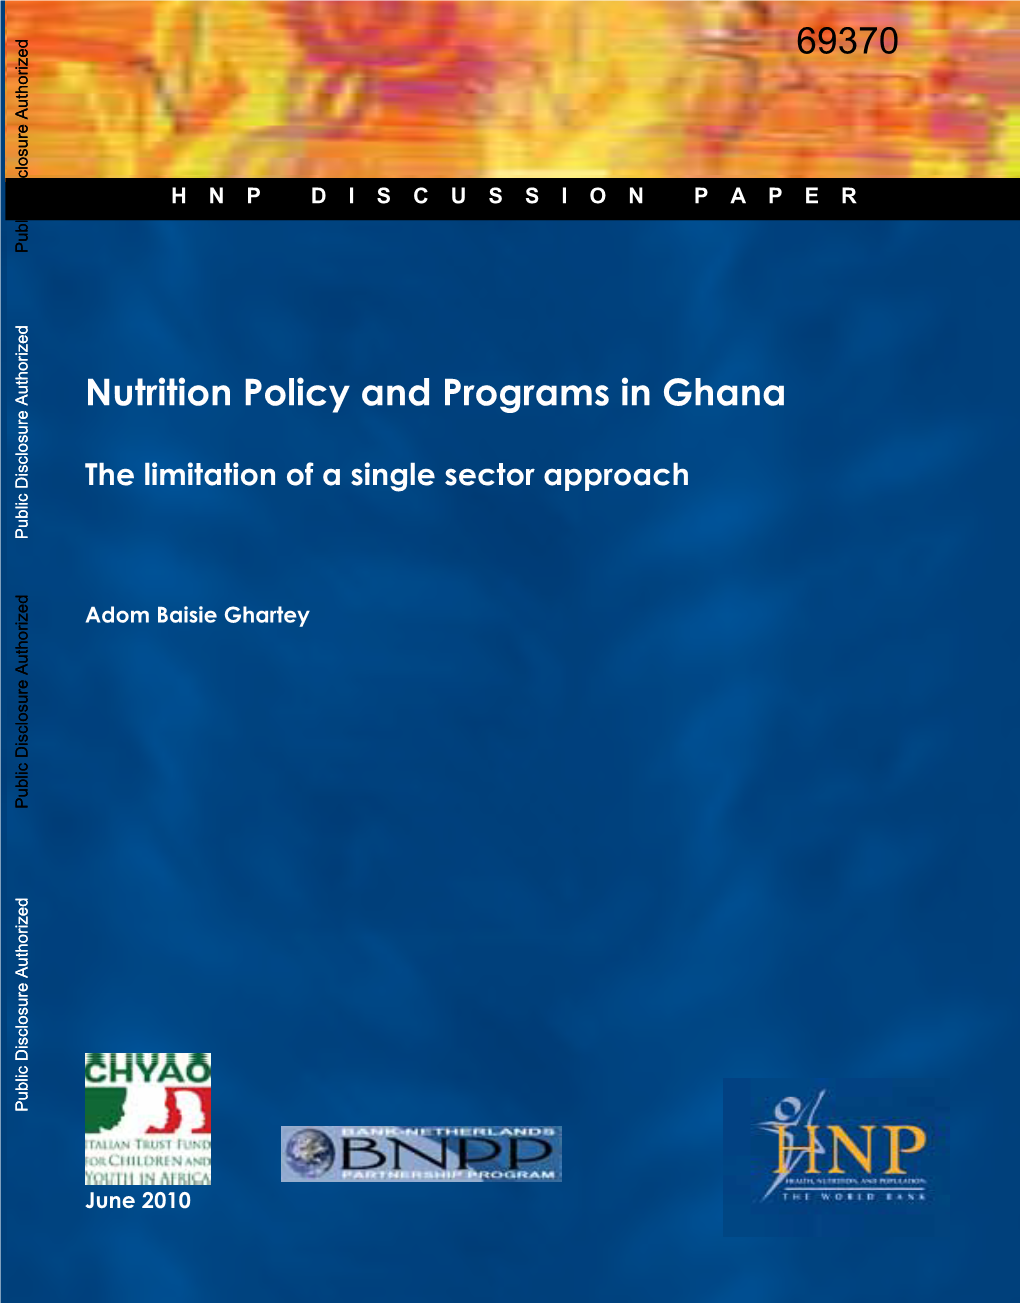 Policy Making in Nutrition: